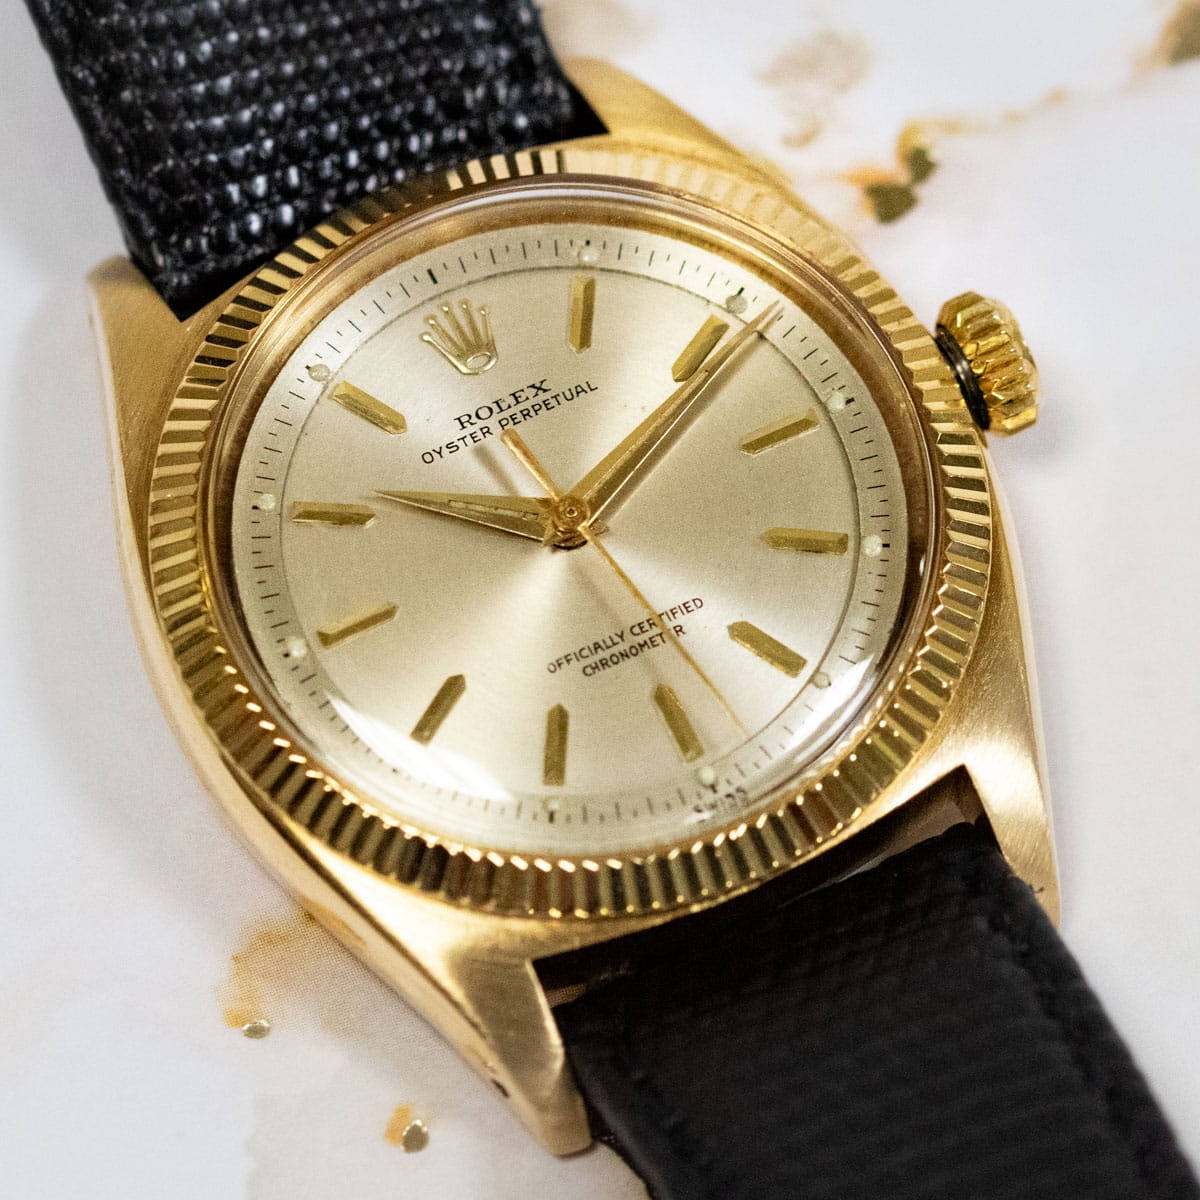 Extra Shot of Oyster Perpetual